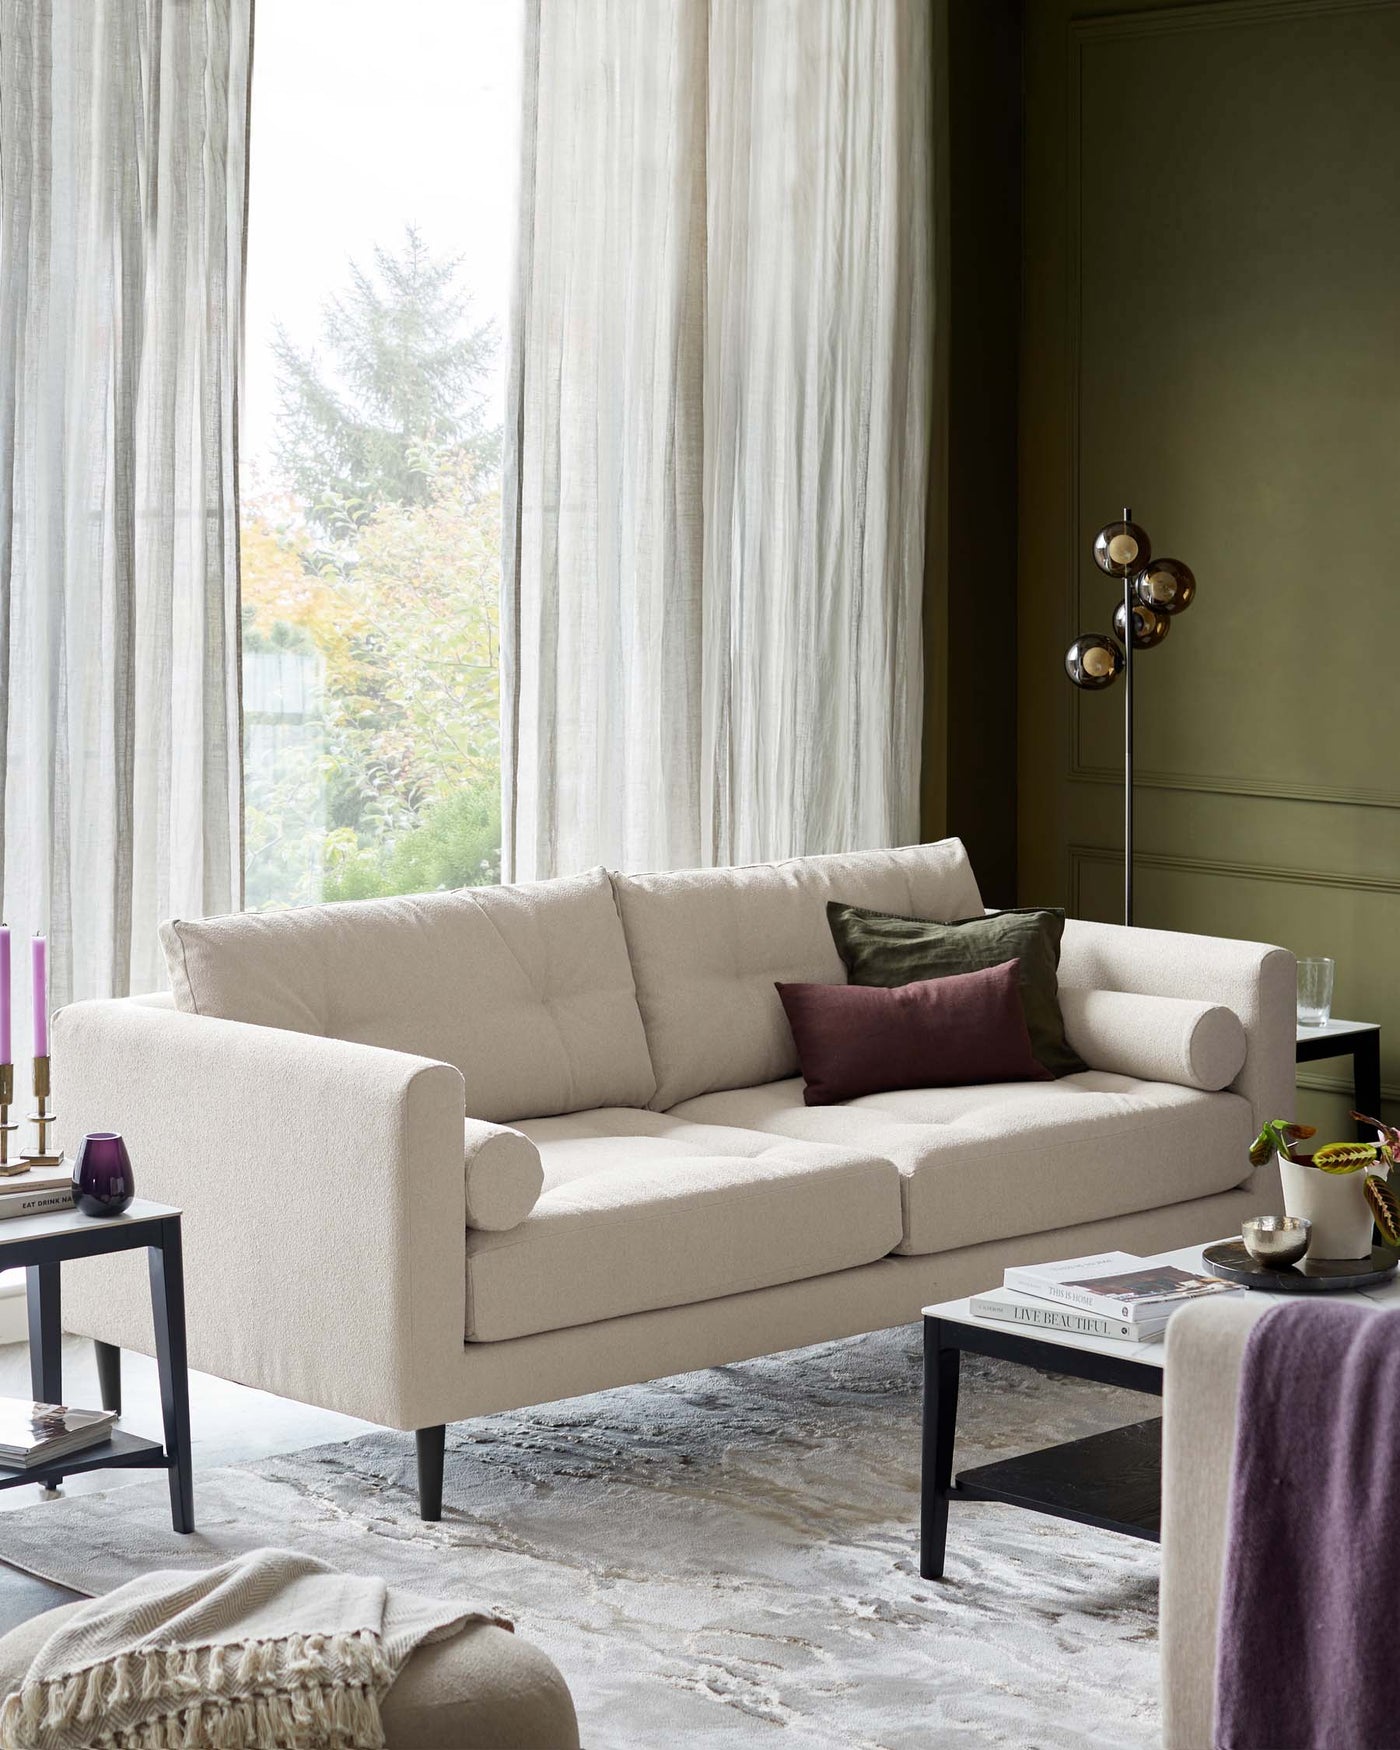 Elegant beige three-seater sofa with plush cushions and clean lines, complemented by a modern black square side table with a lower shelf. The sofa resides on a textured grey area rug, surrounded by soft drapery and a warm, muted room palette.